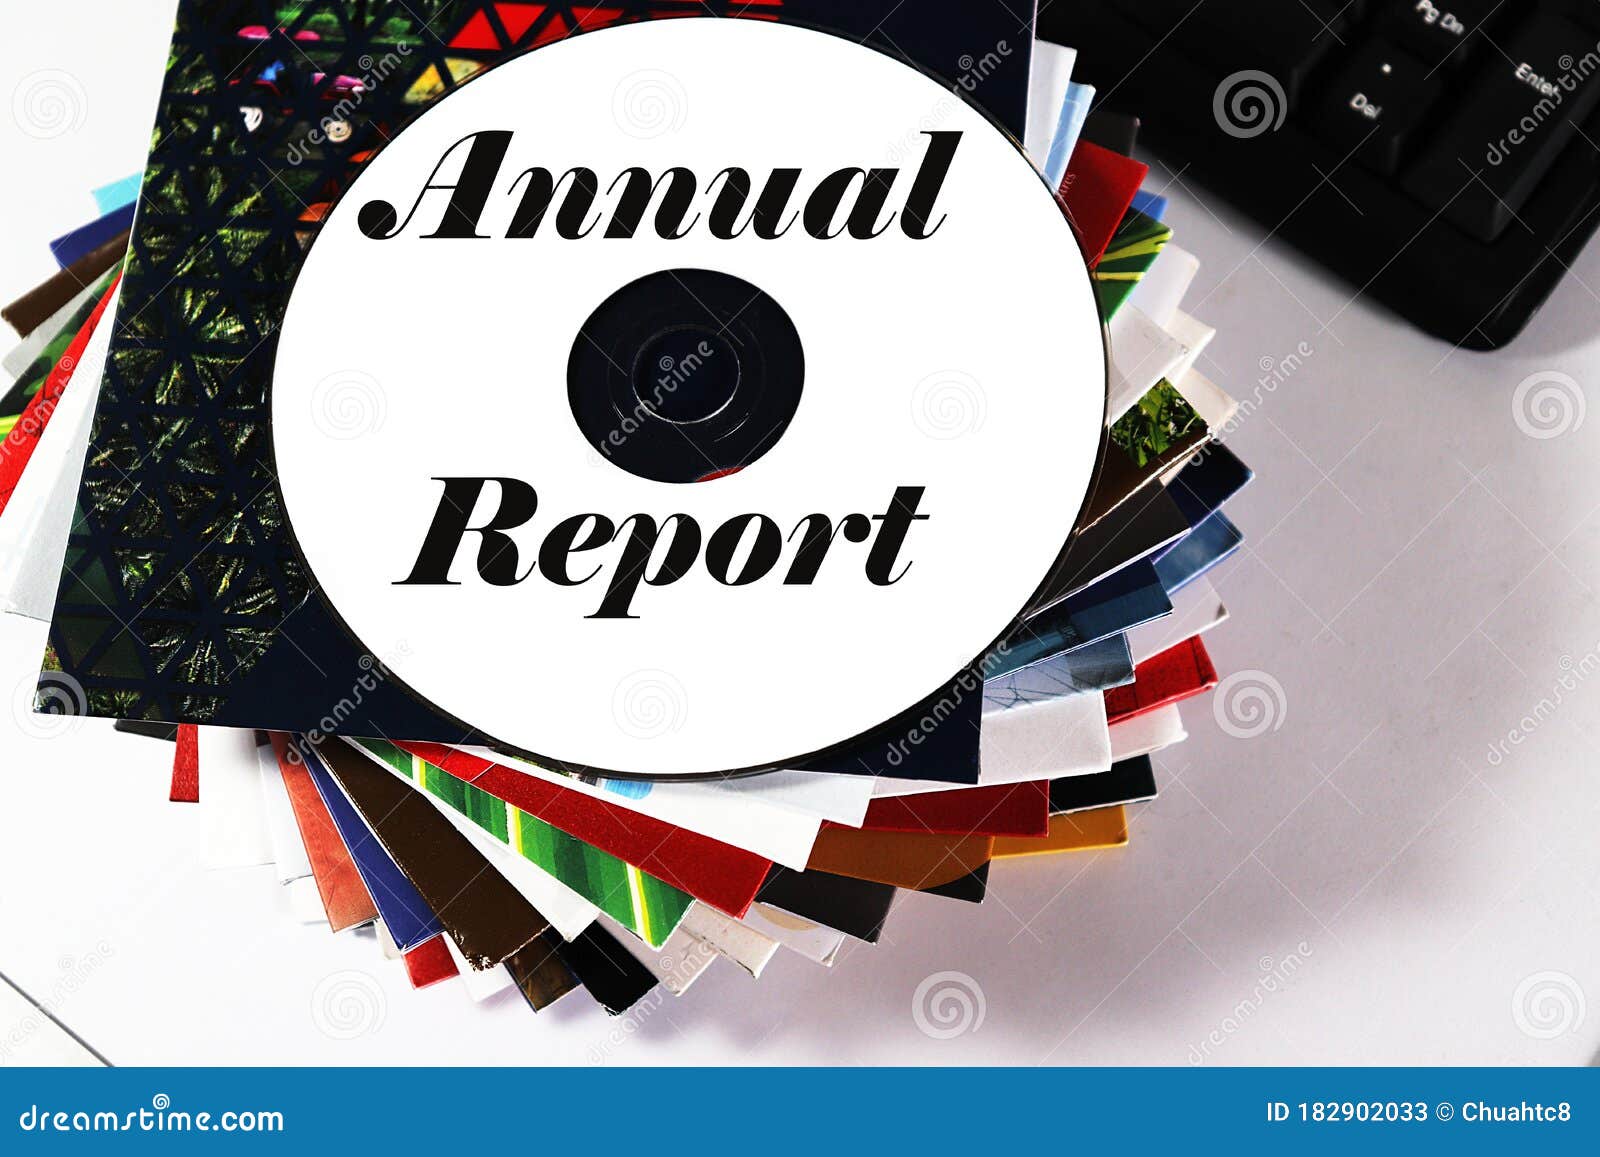 stack of corporate annual report in cdrom format